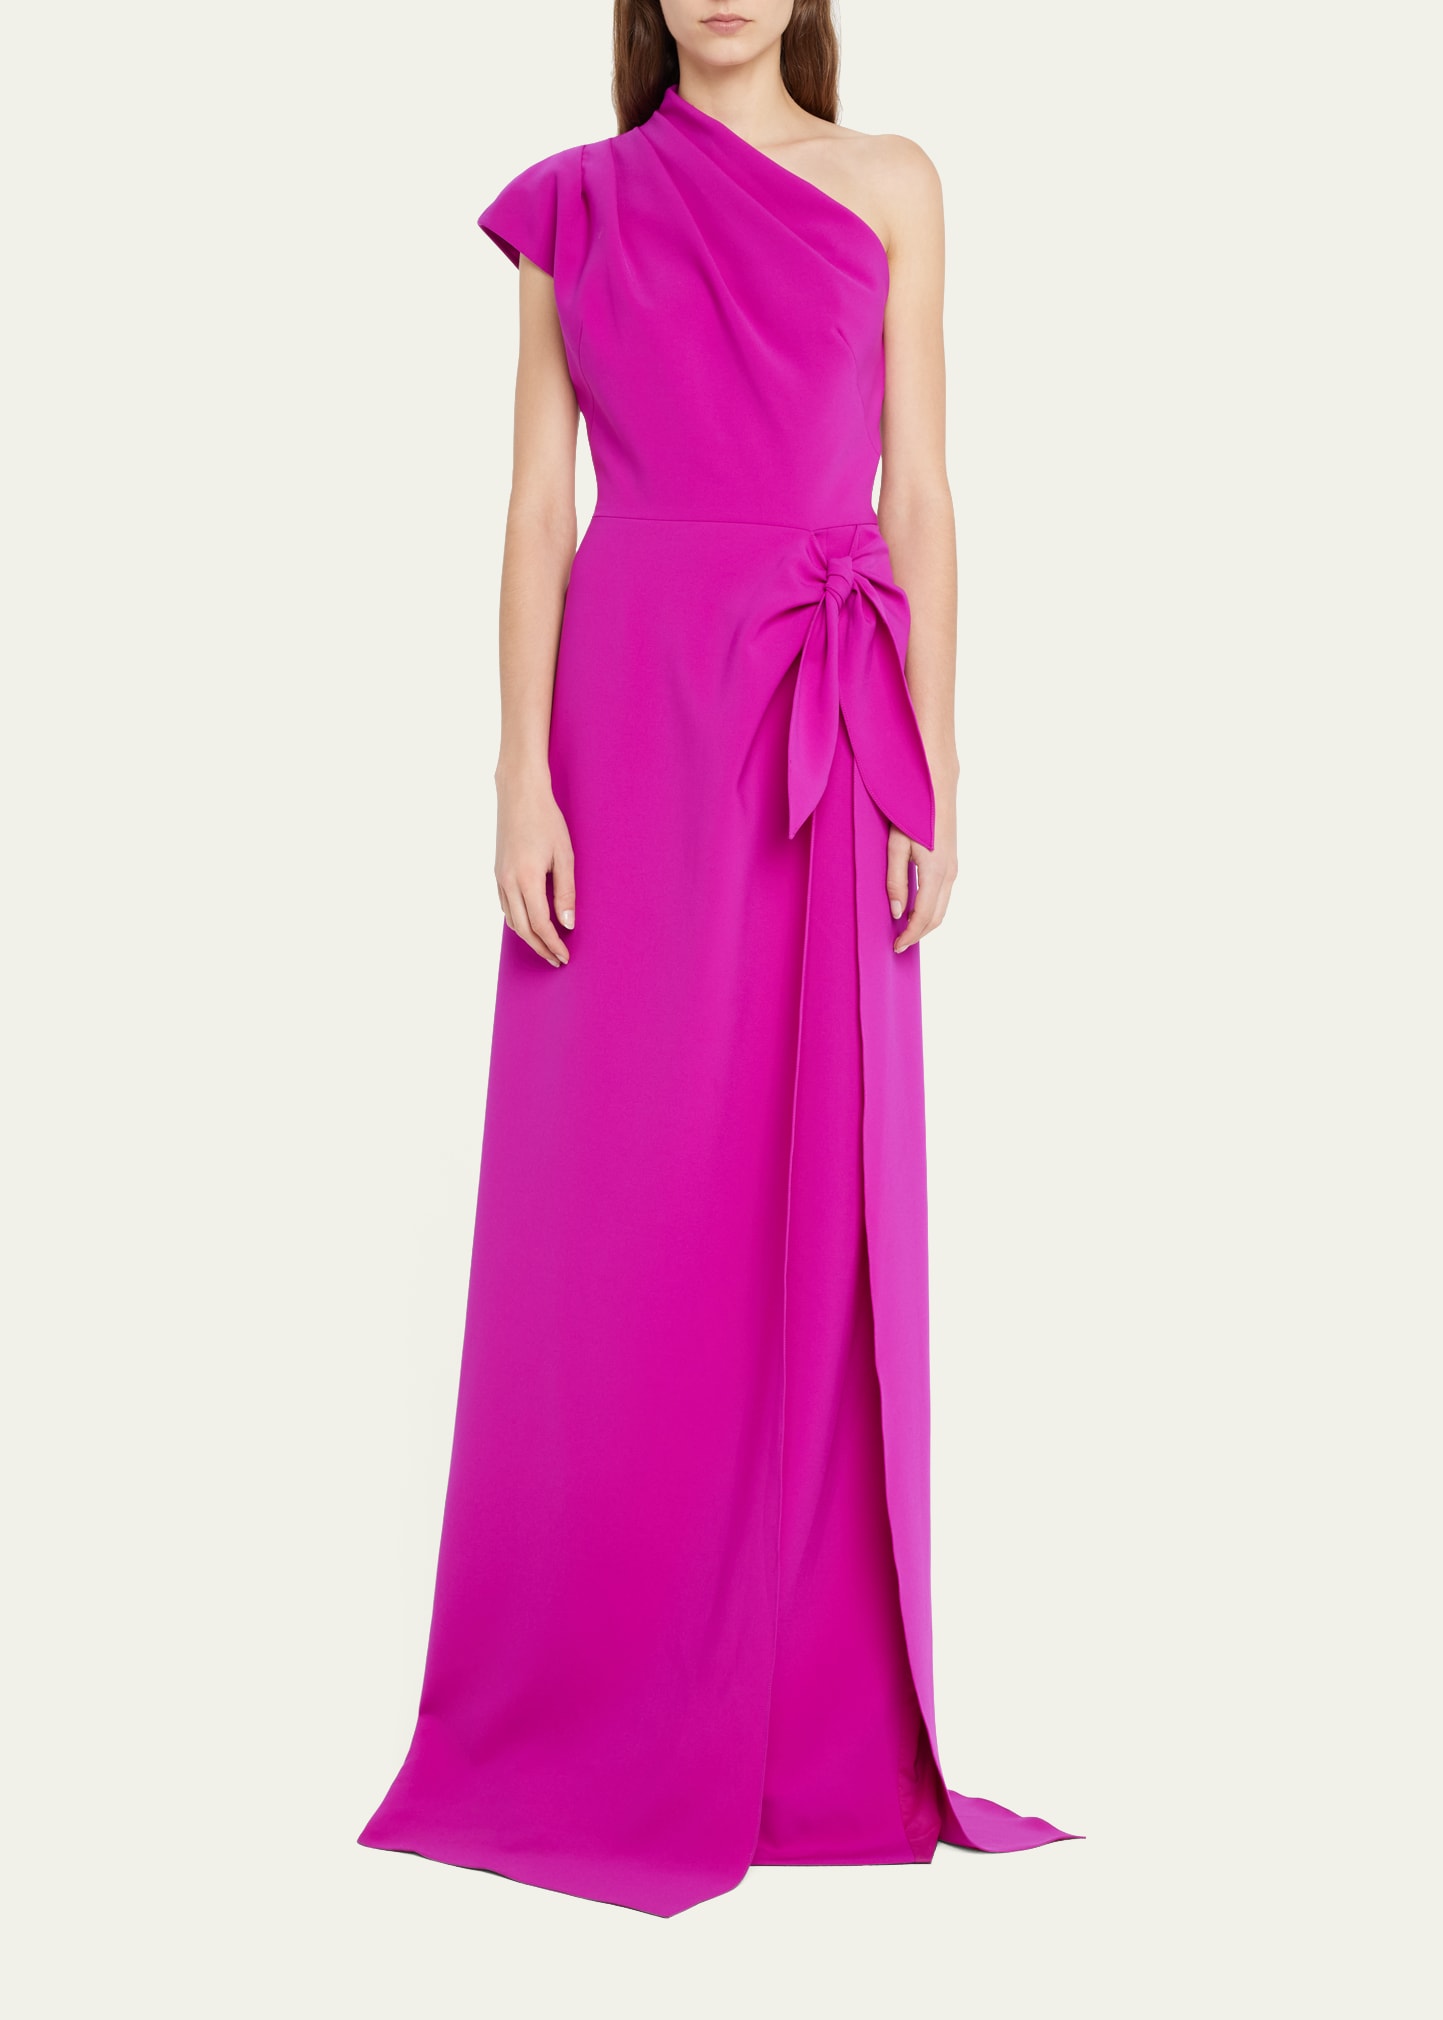 Draped Cap-Sleeve One-Shoulder Gown